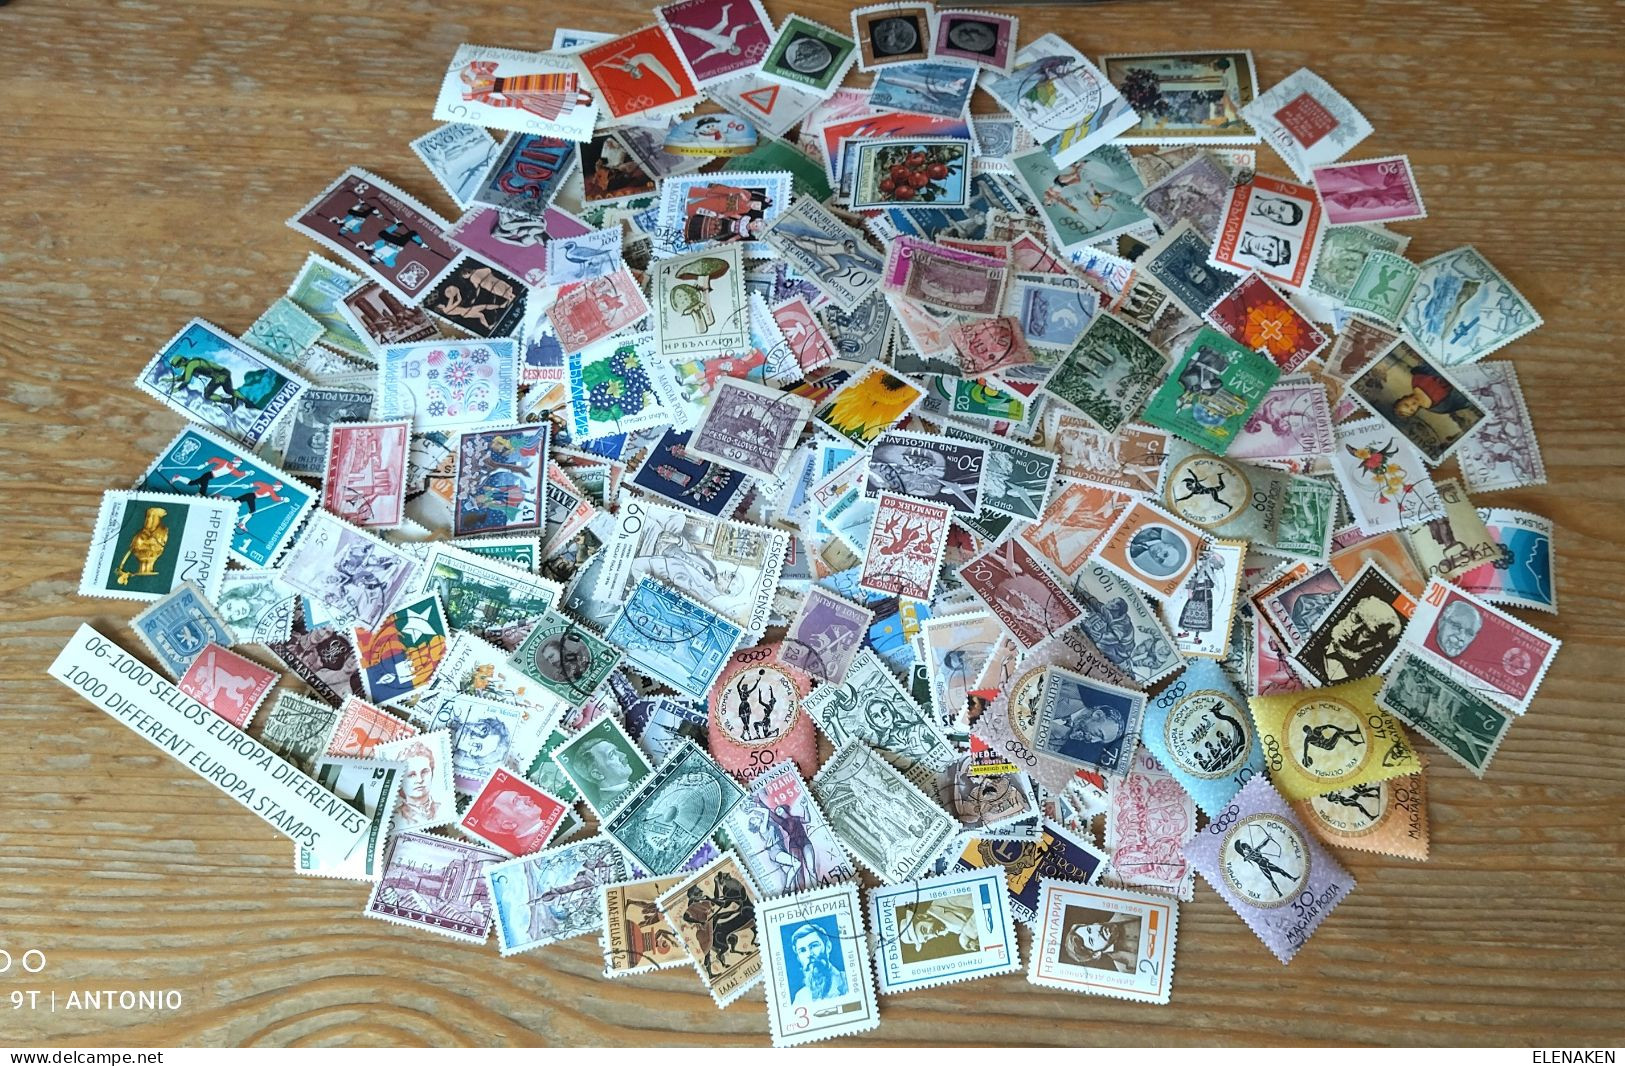 E6-1000 SELLOS DIFERENTES PAÍSES DE EUROPA  1000 STAMPS DIFFERENT COUNTRIES OF EUROPE - Lots & Kiloware (mixtures) - Min. 1000 Stamps